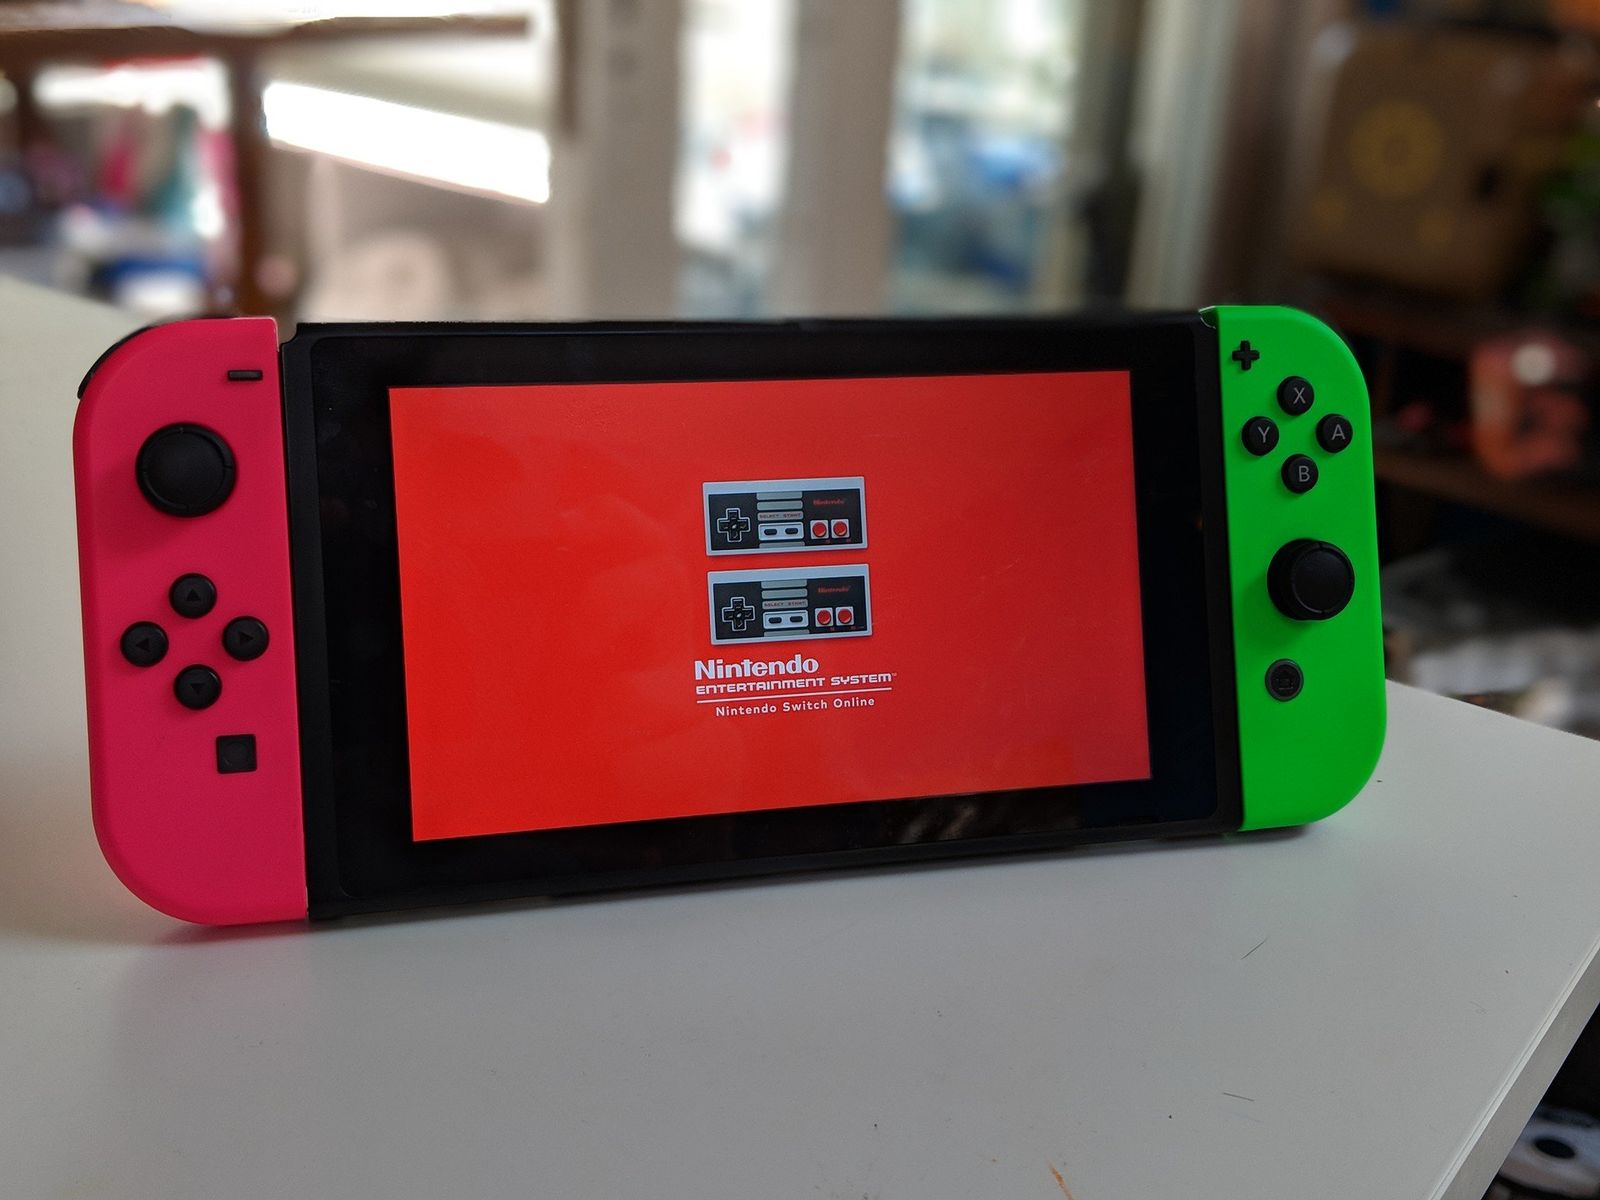 SNES, N64 & Gameboy Categories Spotted In Nintendo Switch EShop